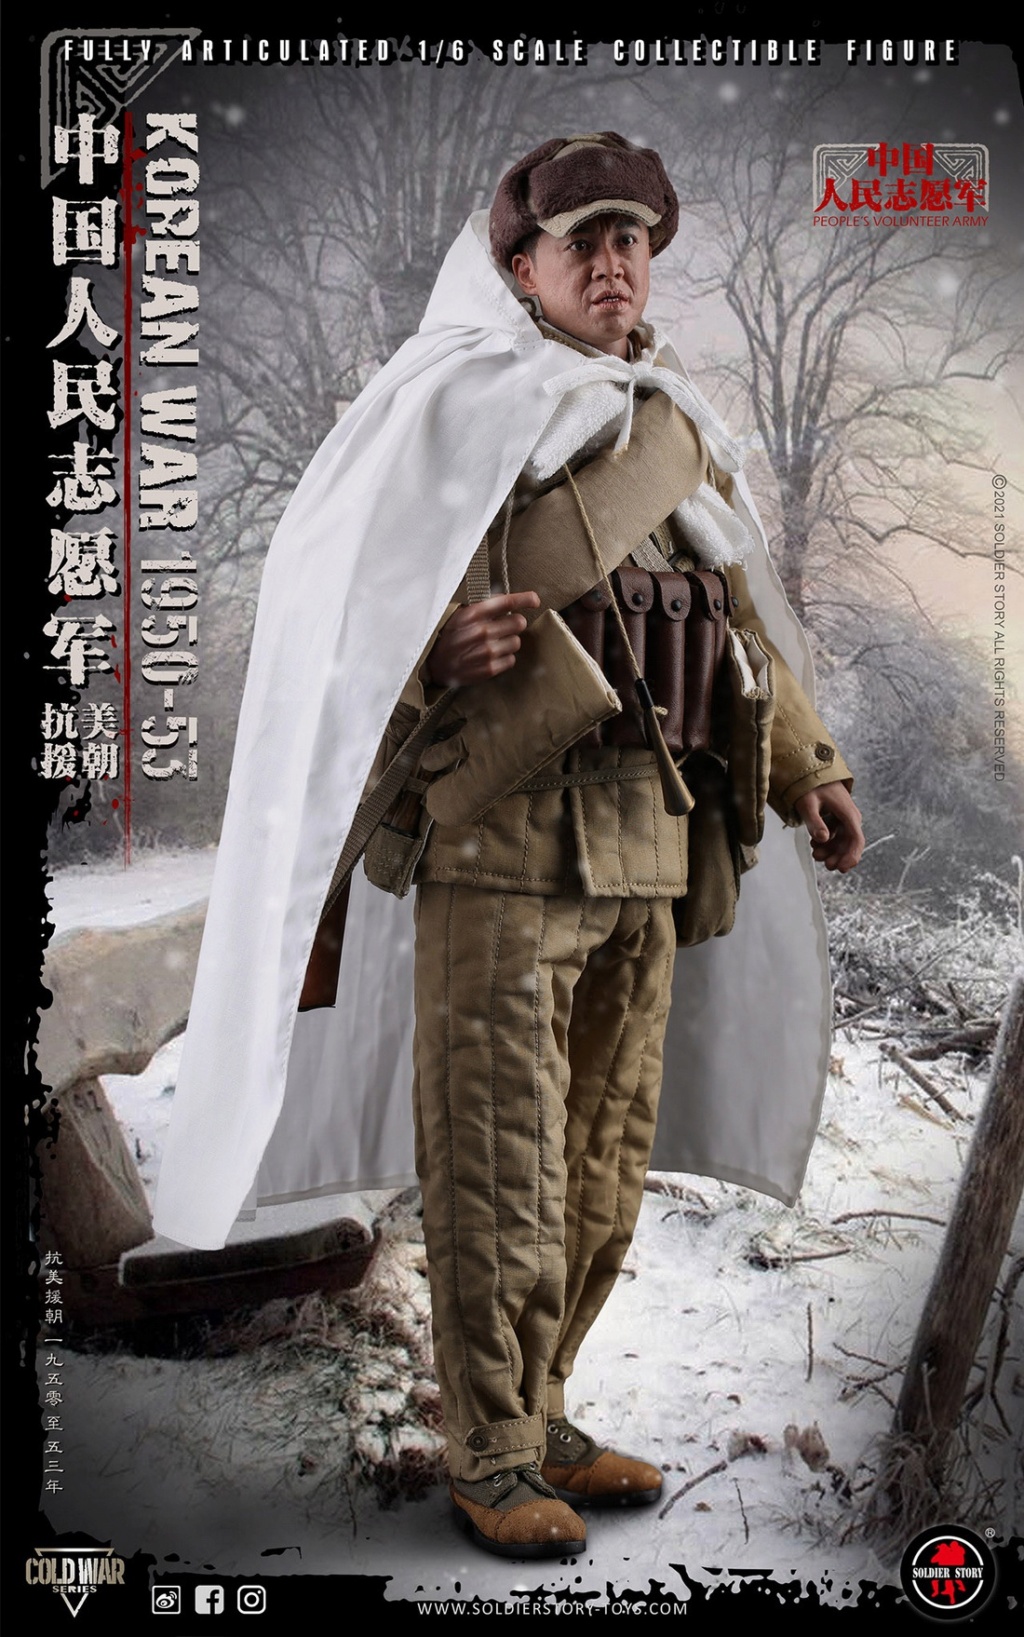 Soldierstory - NEW PRODUCT: SOLDIER STORY: 1/6 Chinese People’s Volunteers 1950-53 Collectible Action Figure (#SS-124) 6bc07c10